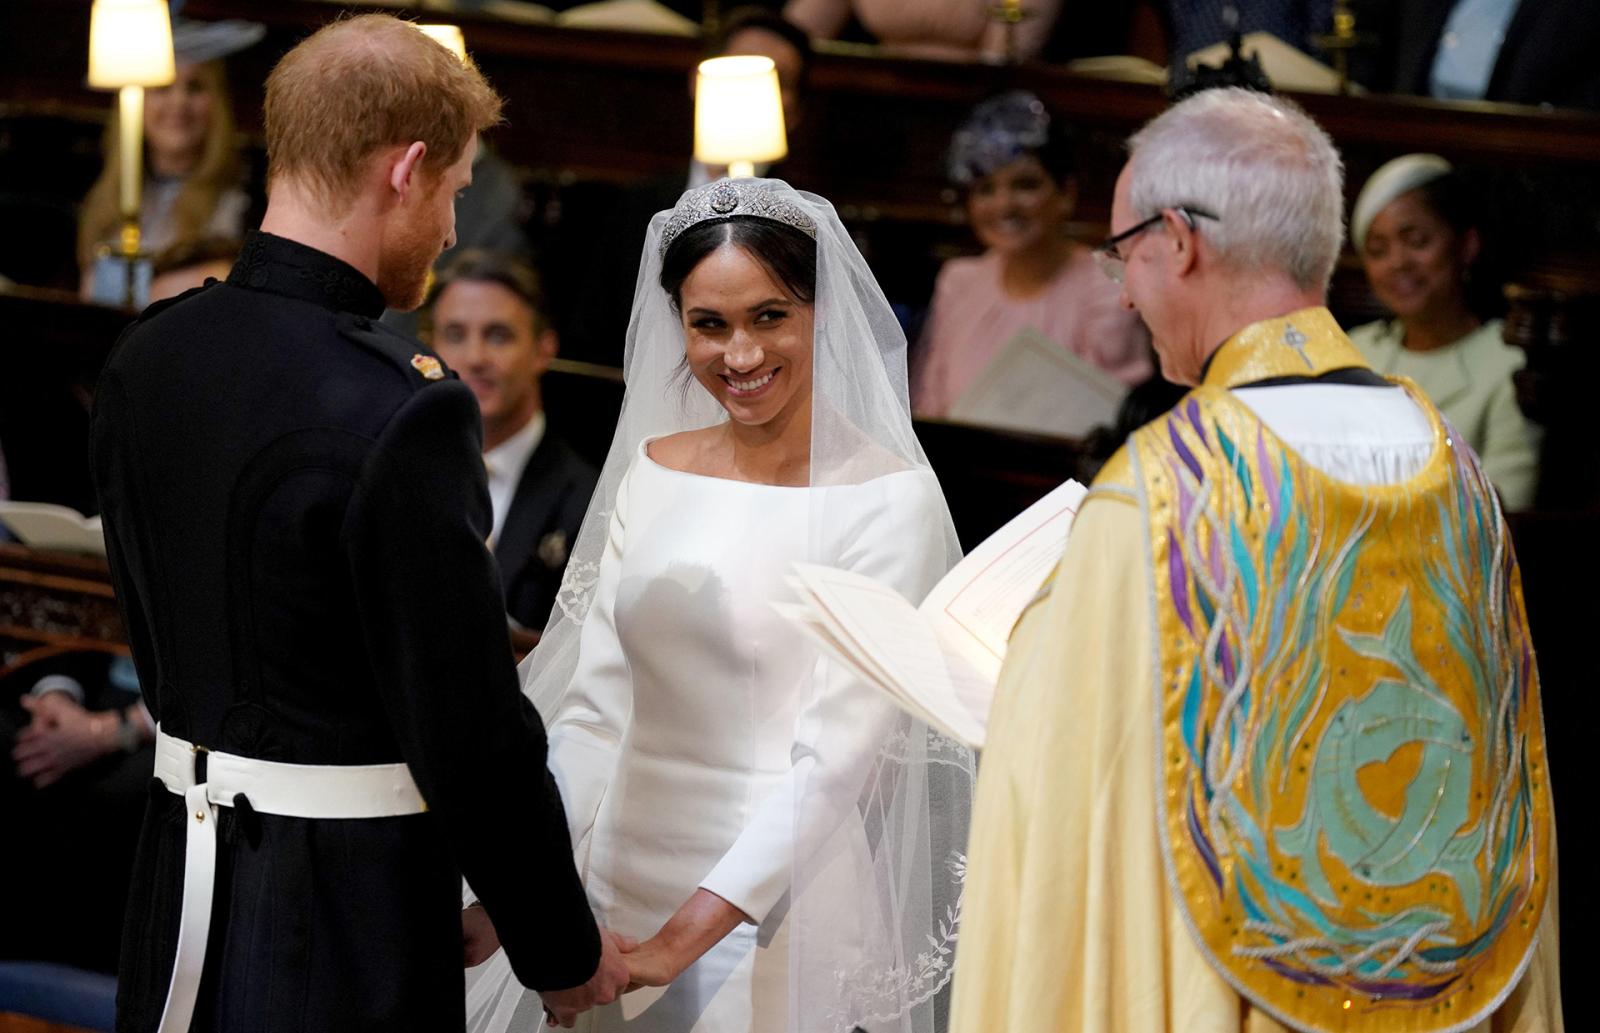 These 6 Royal Weddings Will Leave You Speechless (and Maybe a Little Envious) - image 5